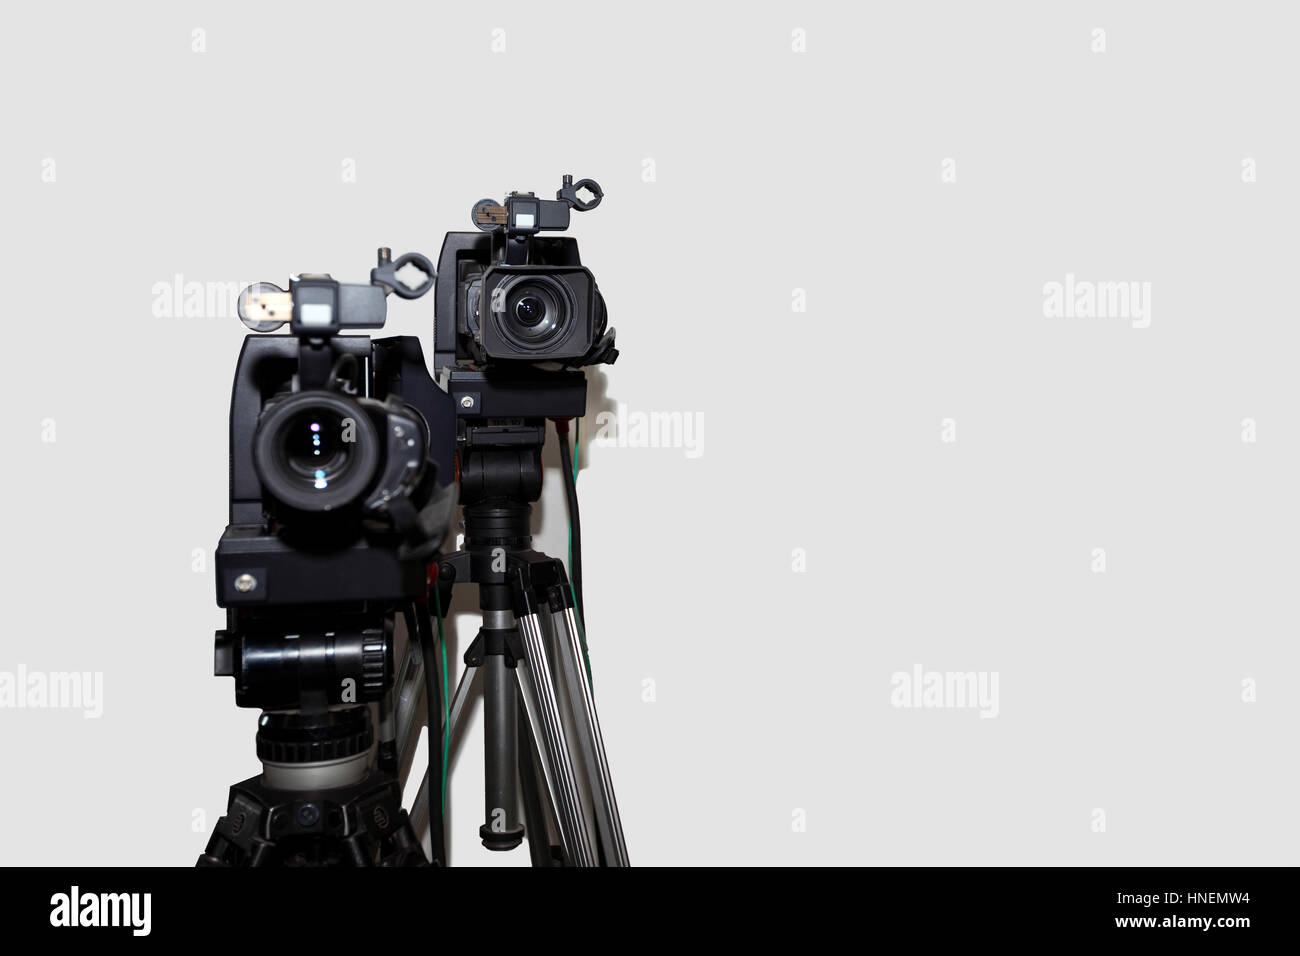 Camera and tripod against white background Stock Photo